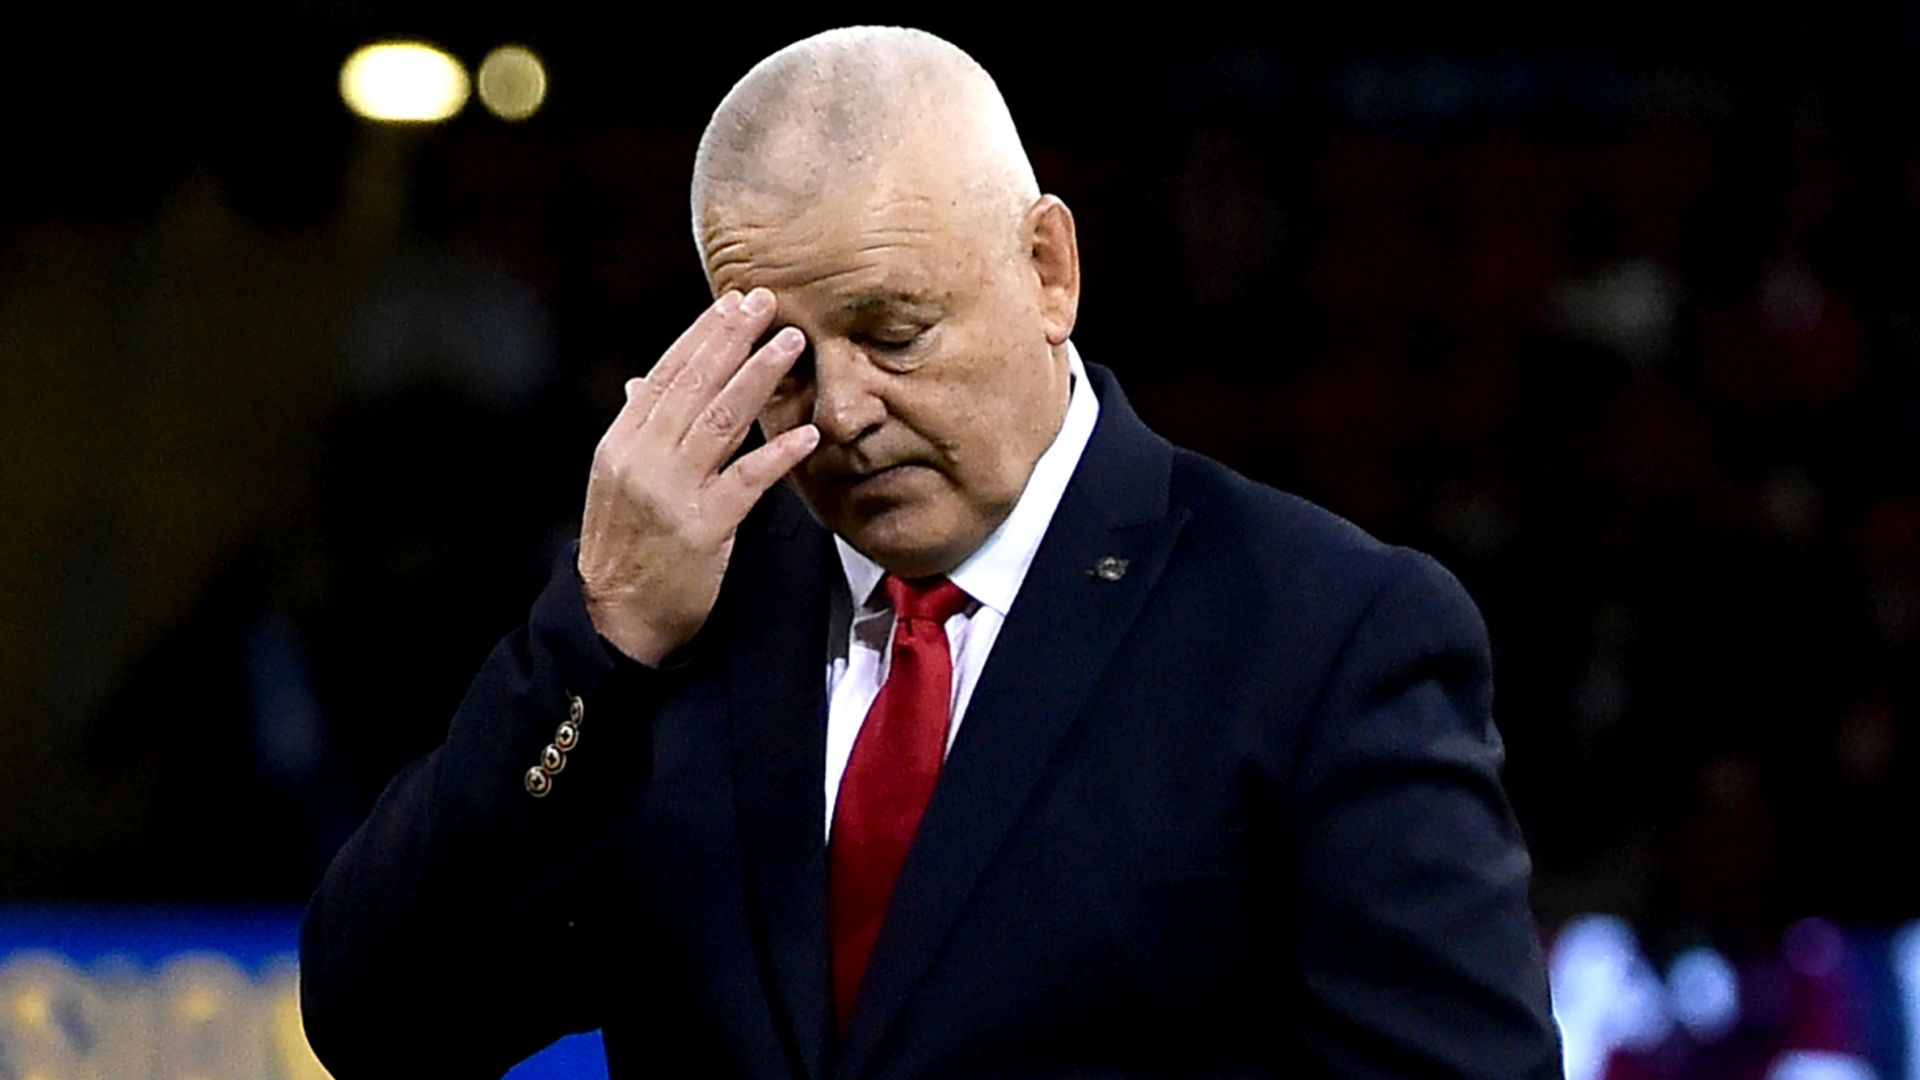 Gatland: Strike threat caused 'significant split' in Wales squad